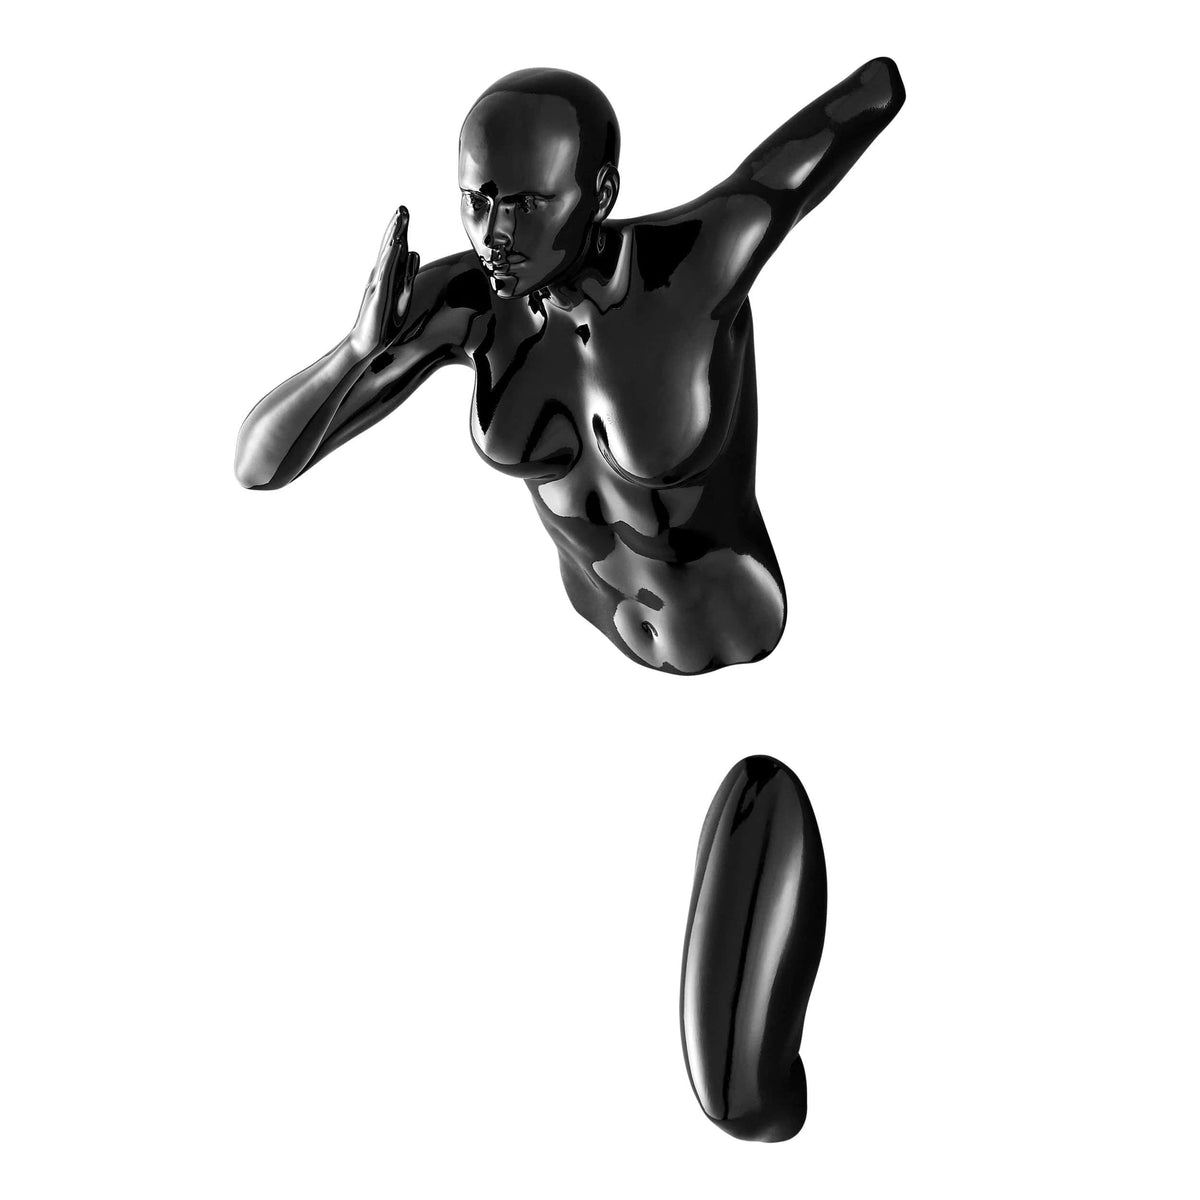 Running Women Wall Sculpture Set of 2 in Black and White